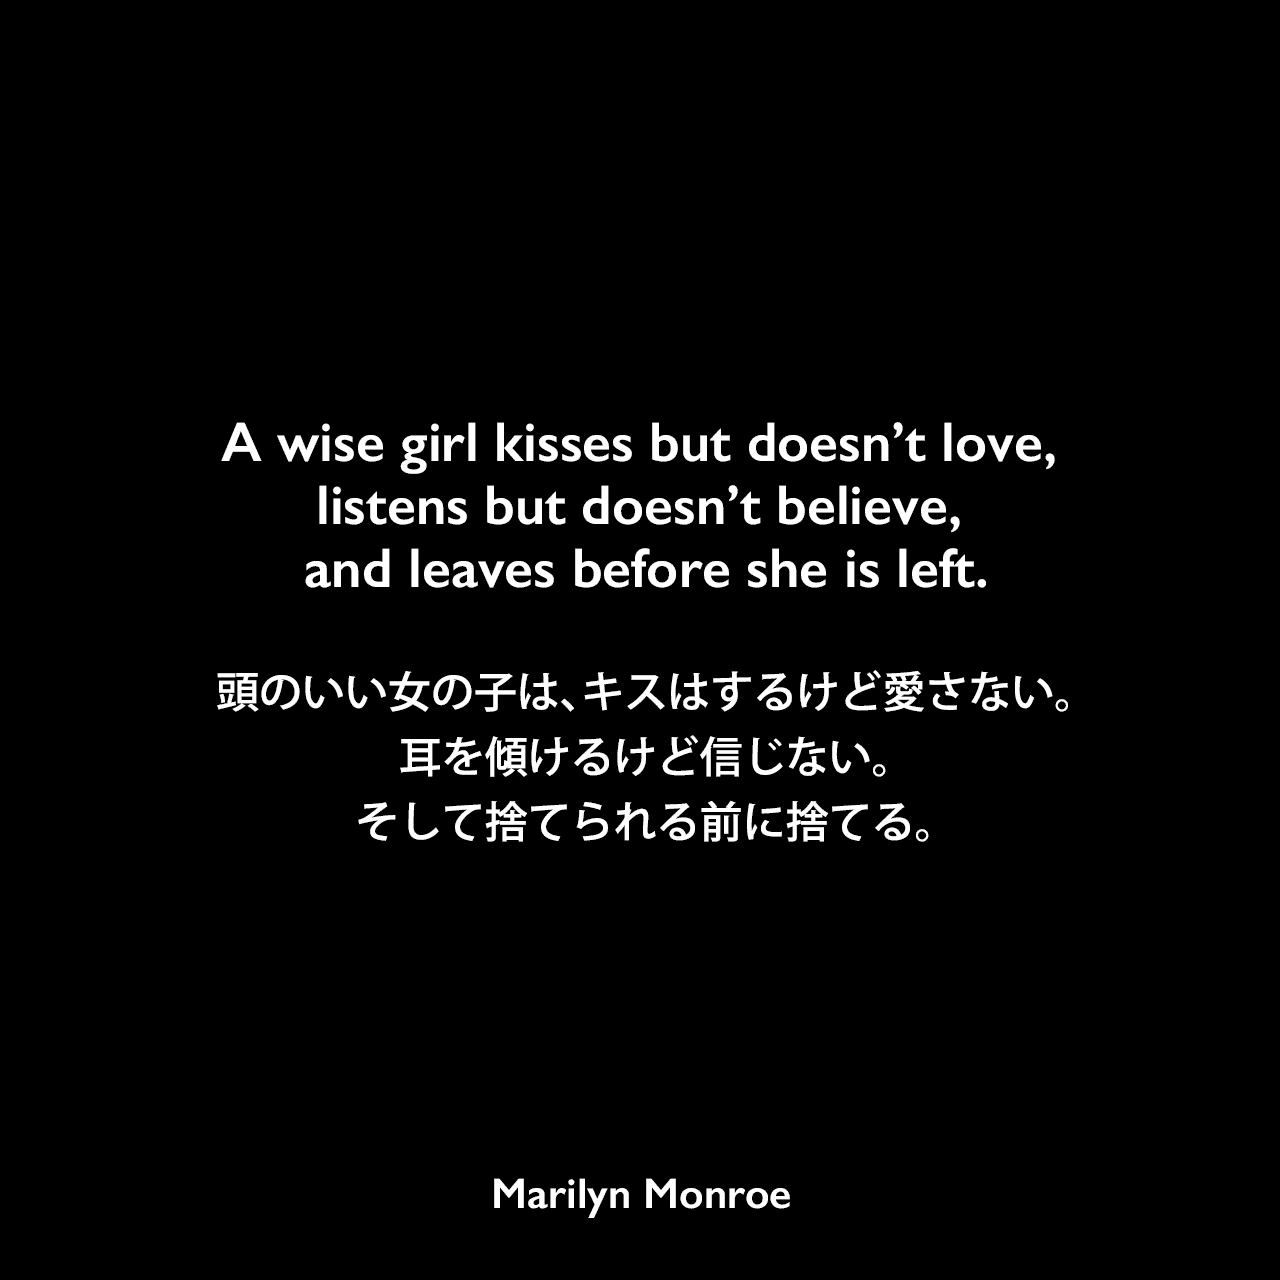 A wise girl kisses but doesn’t love, listens but doesn’t believe, and leaves before she is left.頭のいい女の子は、キスはするけど愛さない。耳を傾けるけど信じない。そして捨てられる前に捨てる。Marilyn Monroe